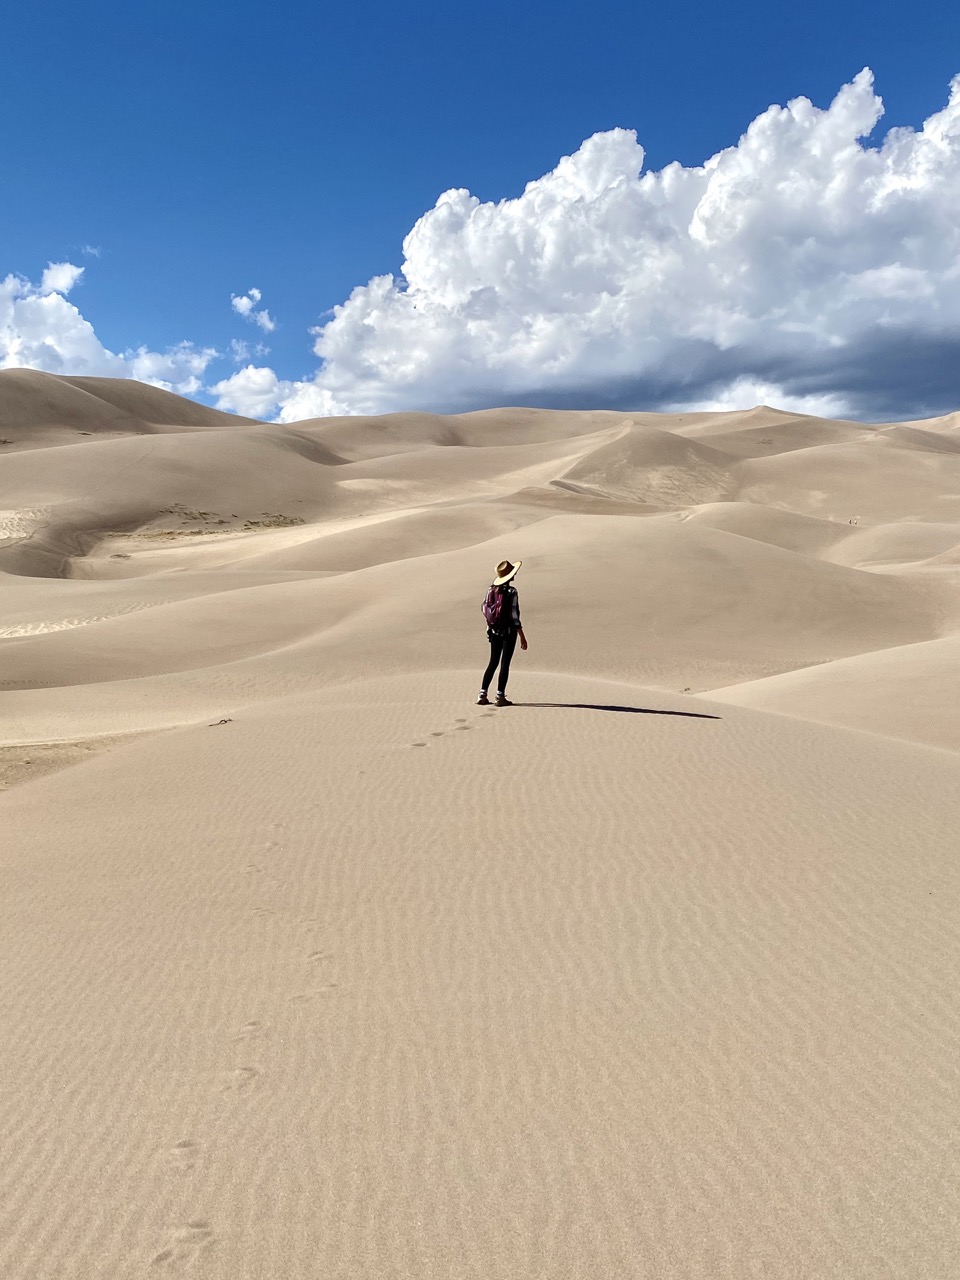 The Most Underrated National Park - The Great Sand Dunes. caroline with background of the dunes